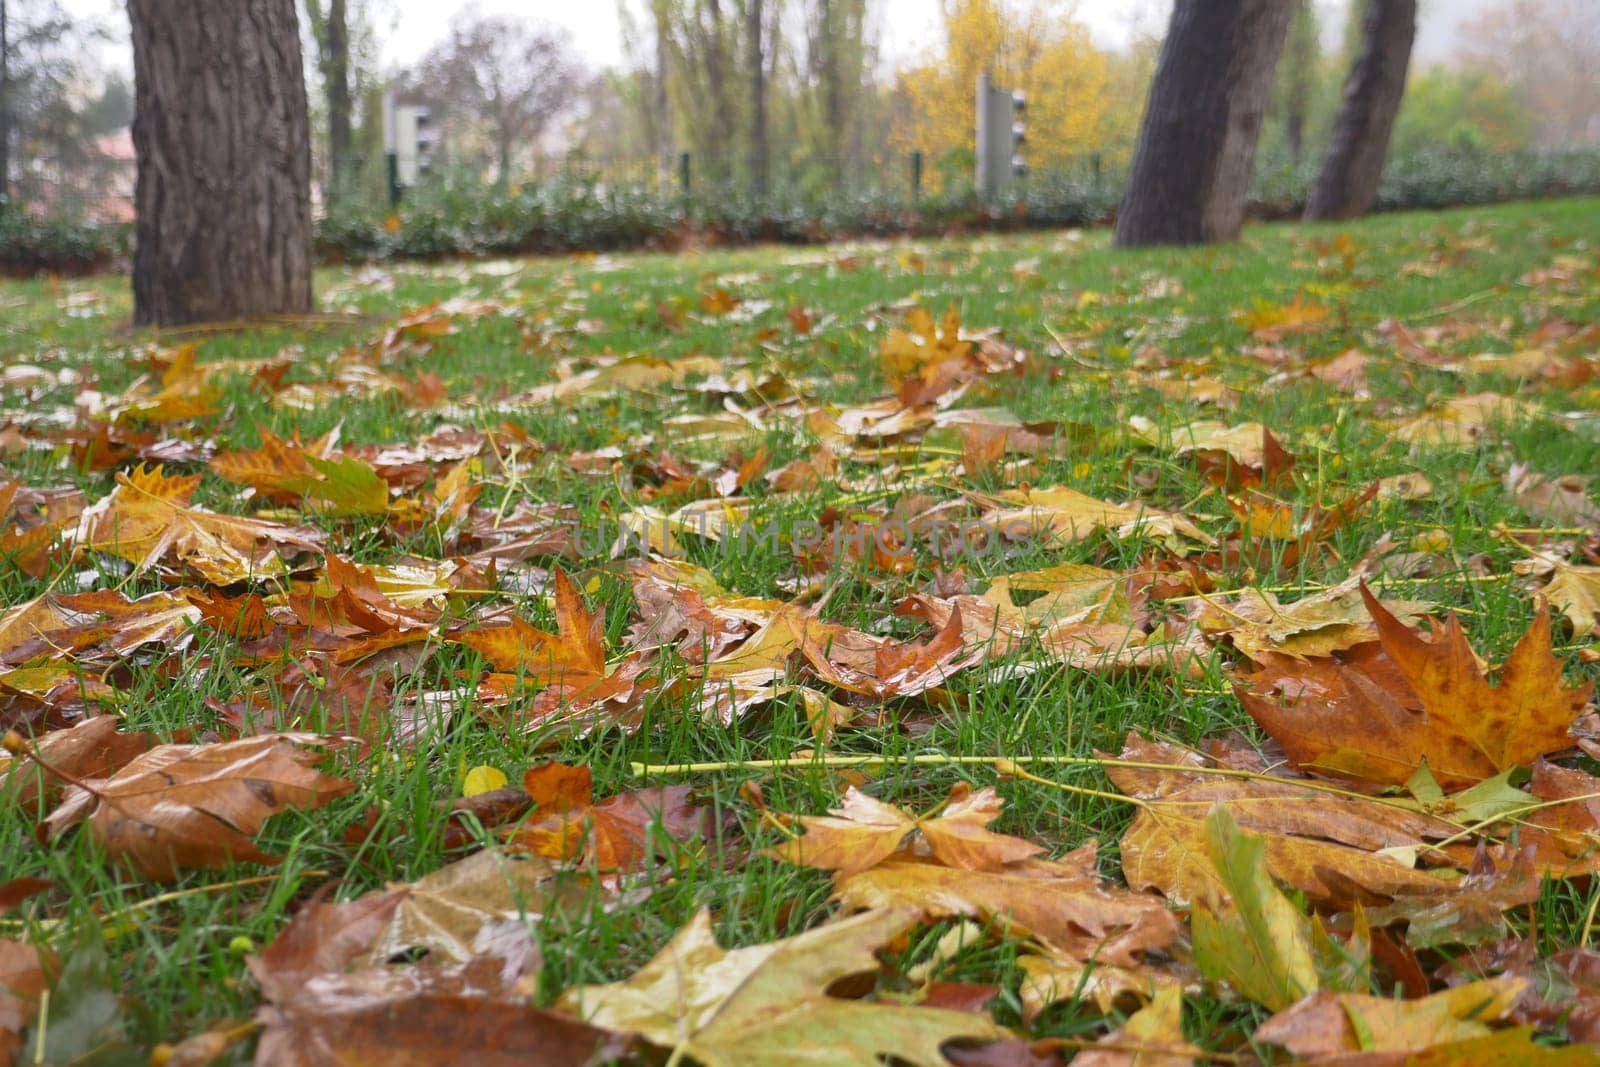 Fallen leaves in green grass close up.